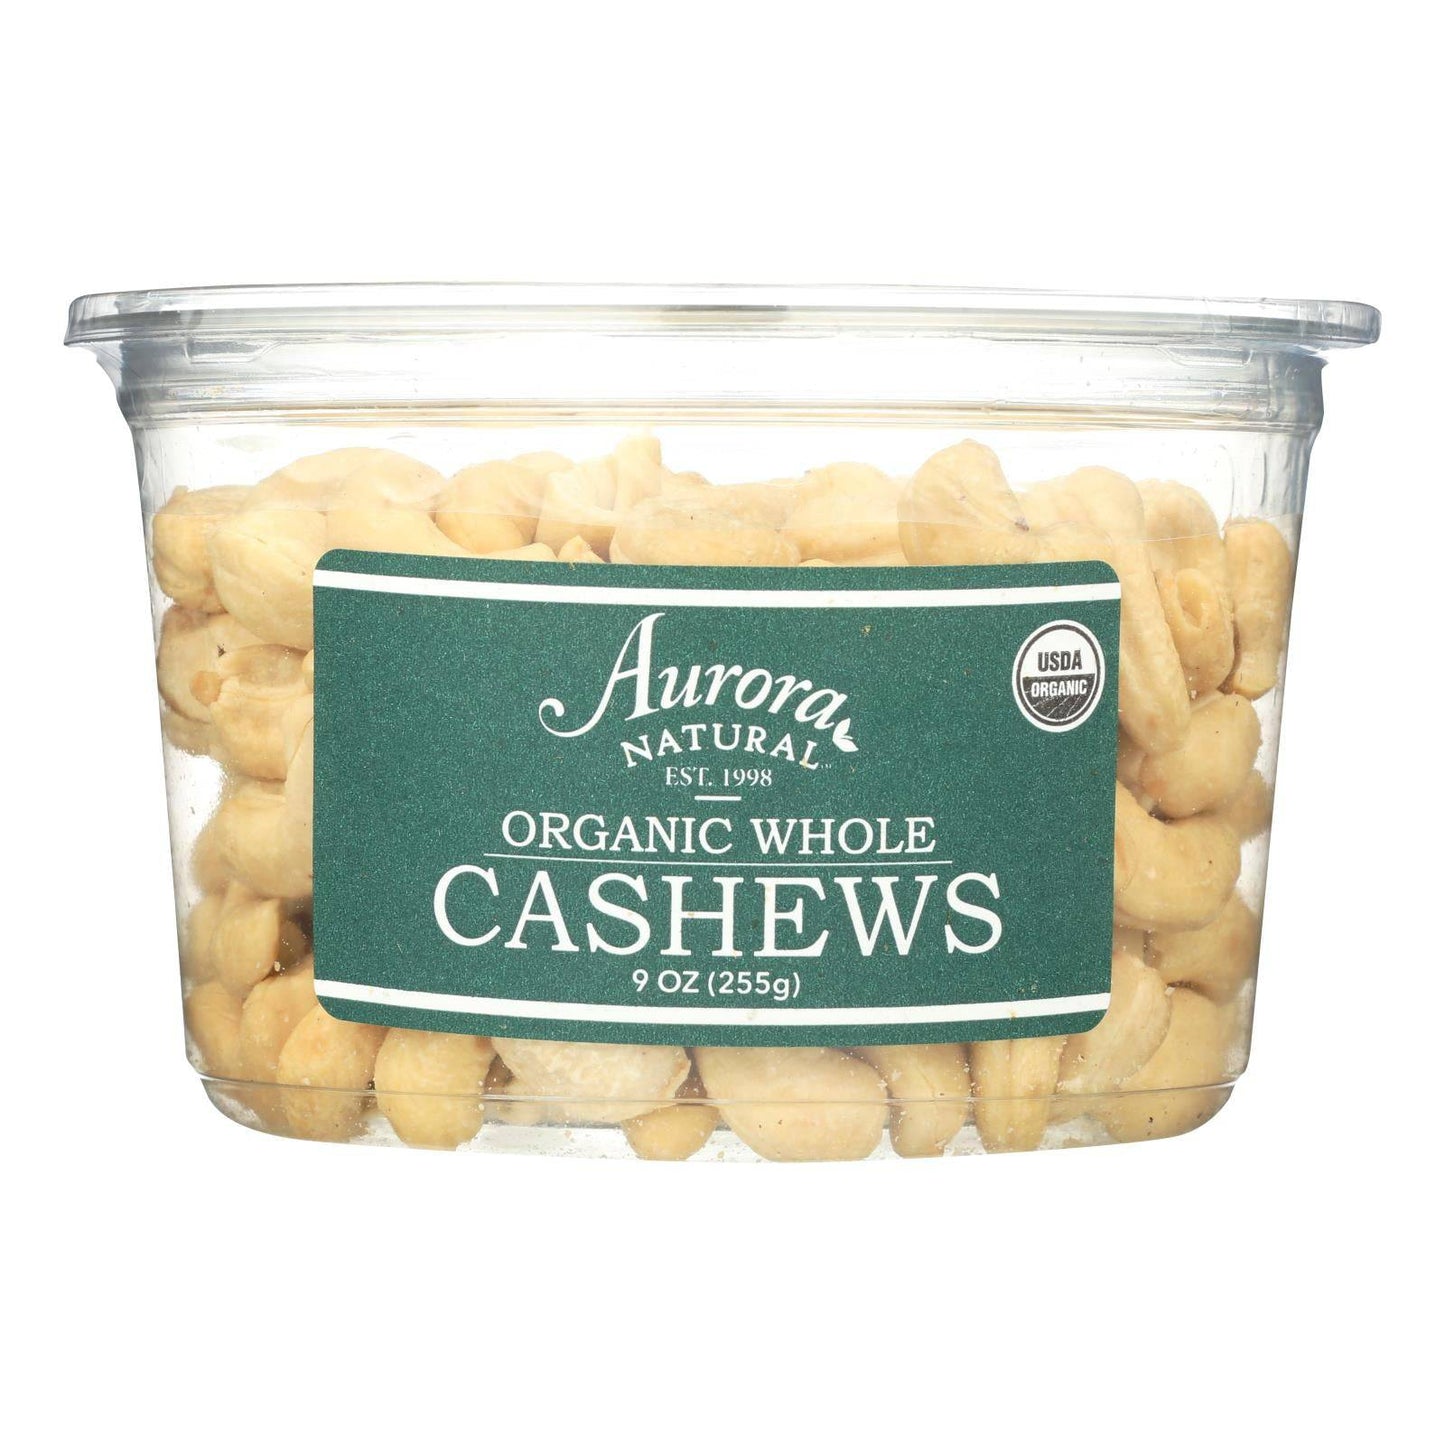 Aurora Natural Products - Organic Whole Cashews - Case Of 12 - 9 Oz. | OnlyNaturals.us